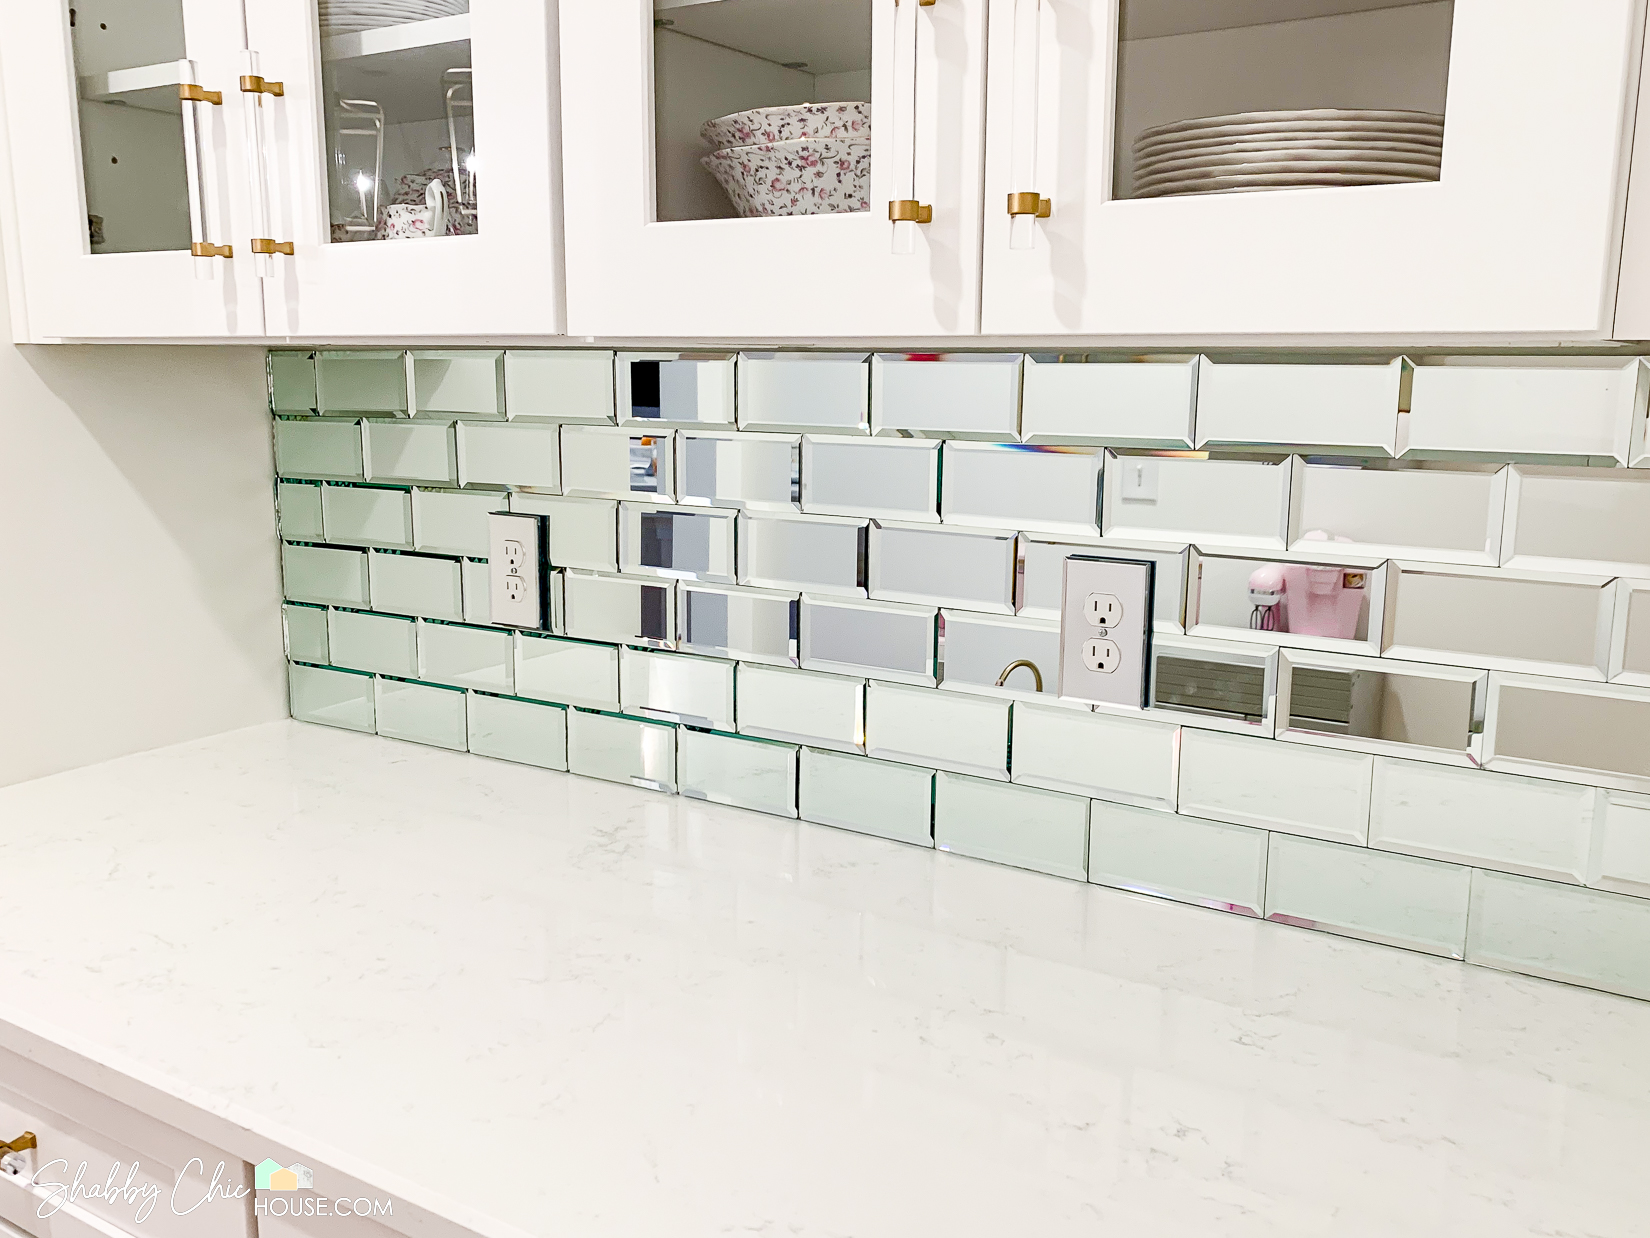 Install A Mirrored Tile Backsplash, How To Measure Wall For Subway Tile